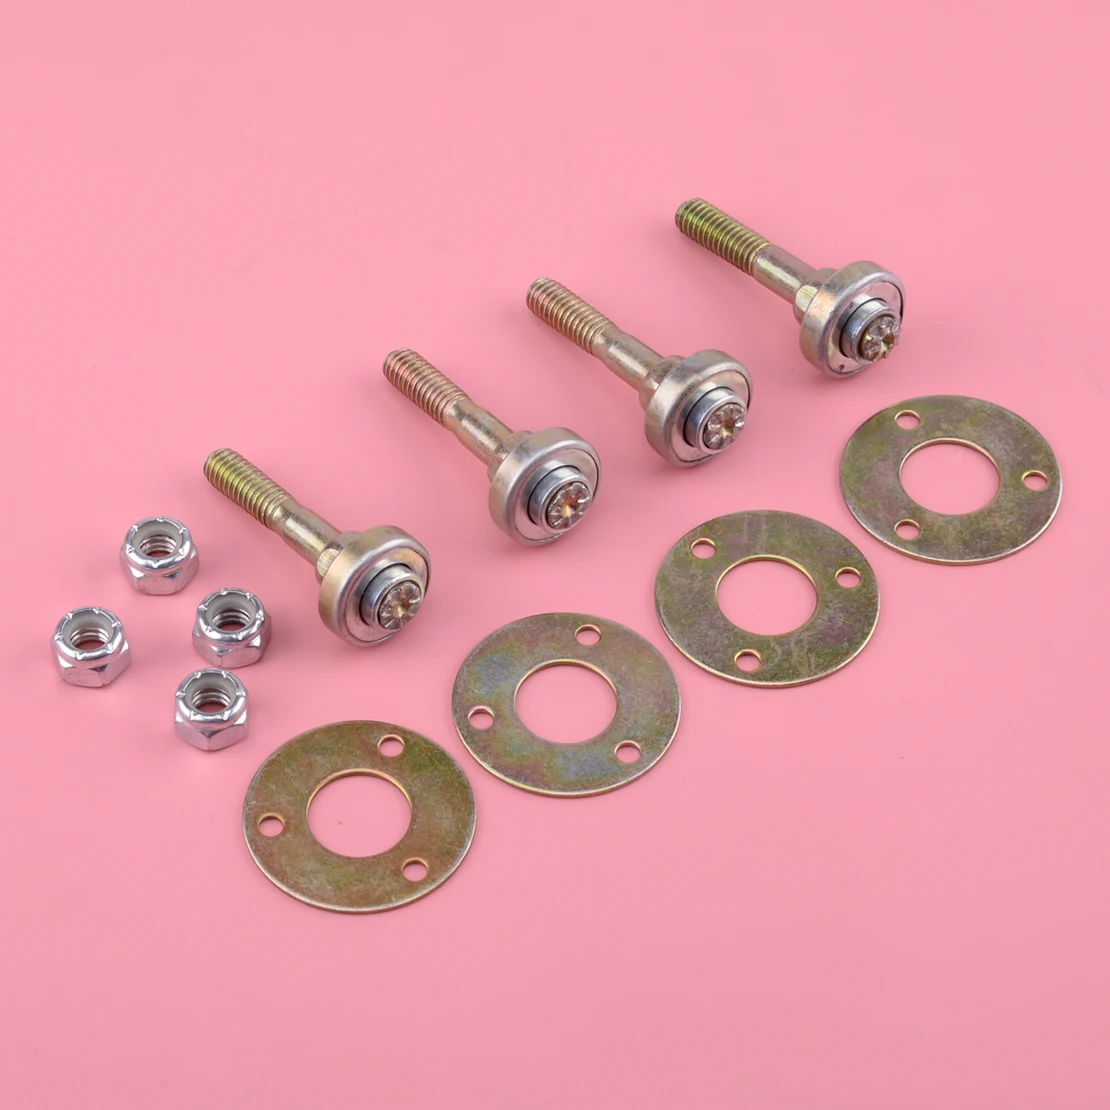 LETAOSK 4 Set of Furniture Rocking Chair Bearing Connecting Piece Screws Bolts Kits 